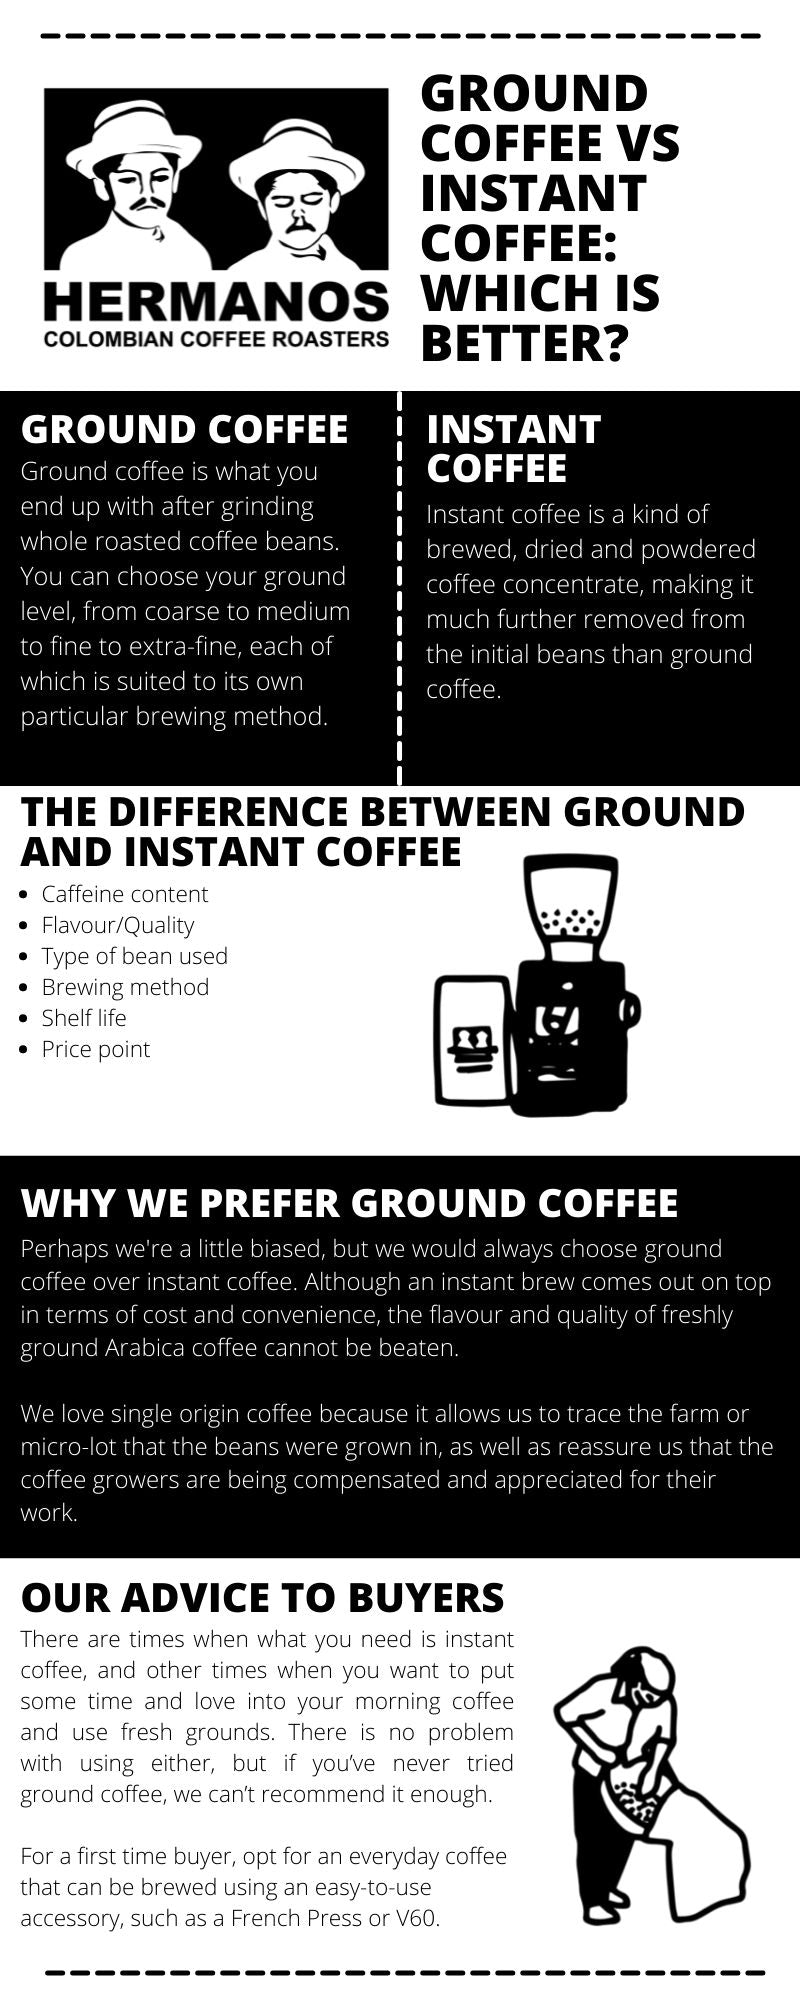 How Long Does Ground Coffee Last? Shelf Life Considerations